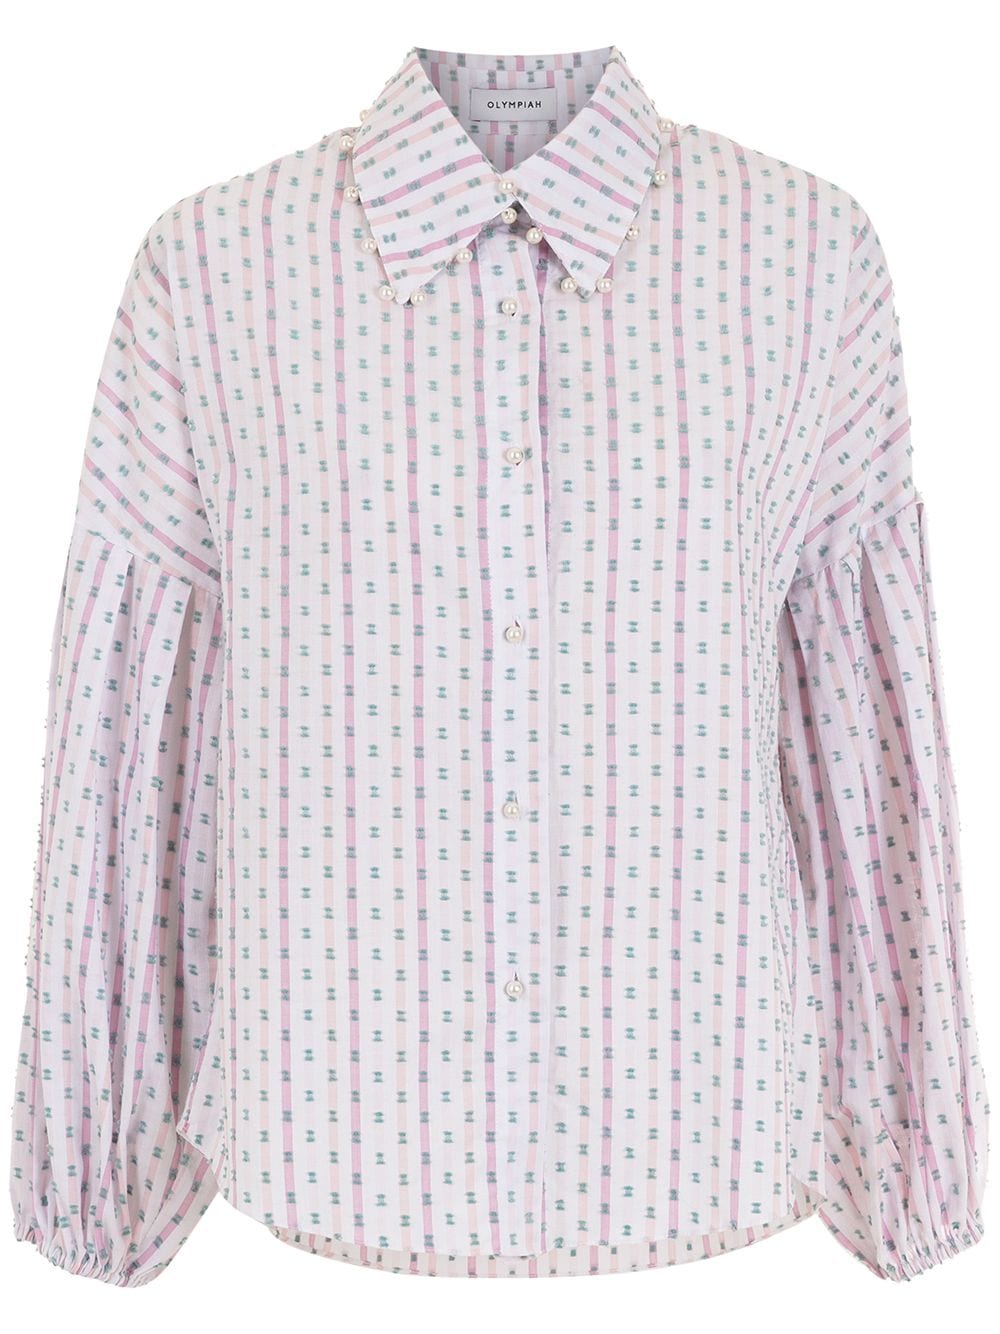 Olympiah patterned button-up shirt - White von Olympiah